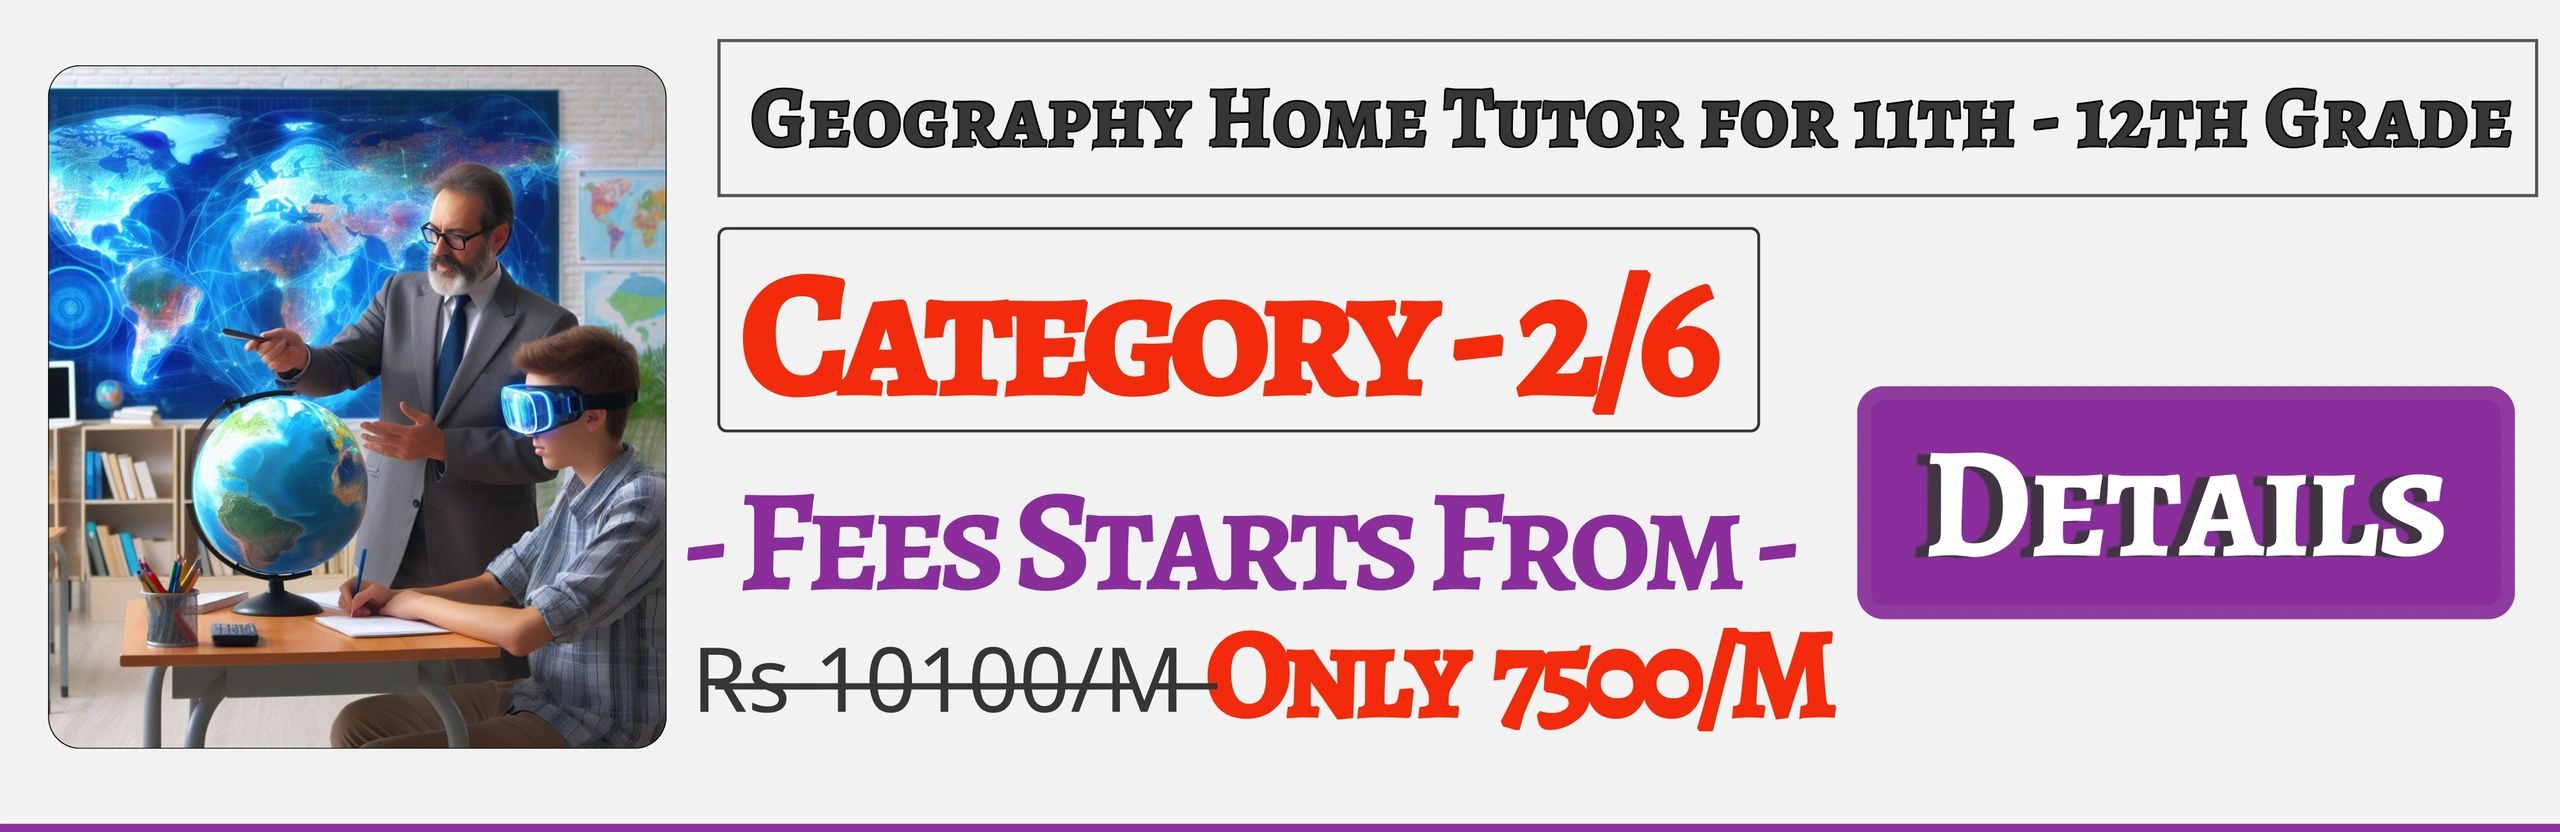 Book Best Nearby Geography Home Tuition Tutors For 11th & 12th In Jaipur , Fees Only 7500/M